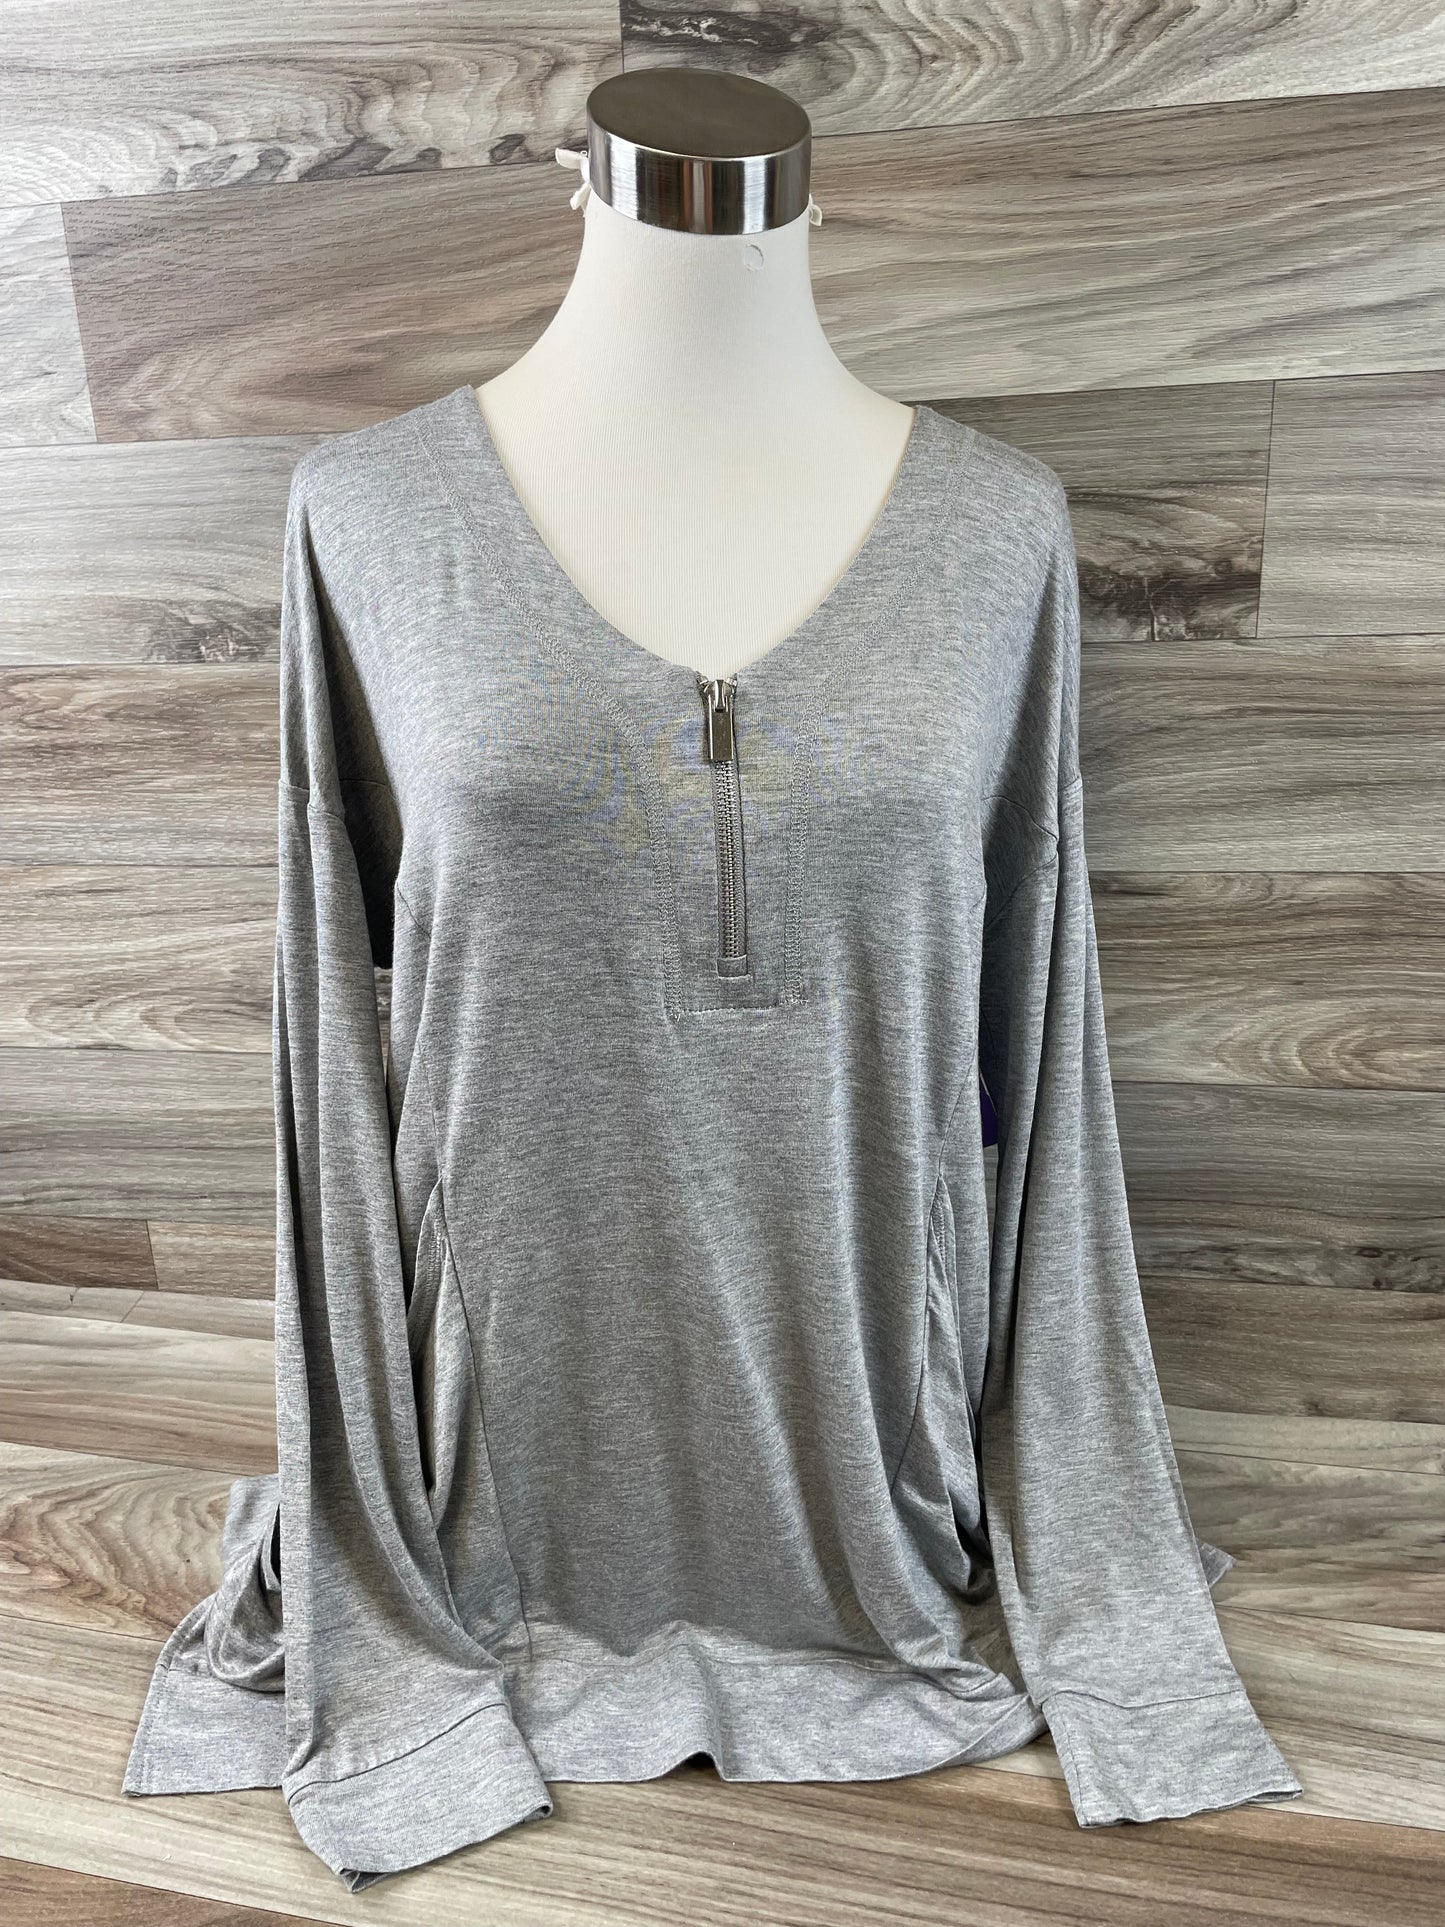 Grey Top Long Sleeve Cable And Gauge, Size M